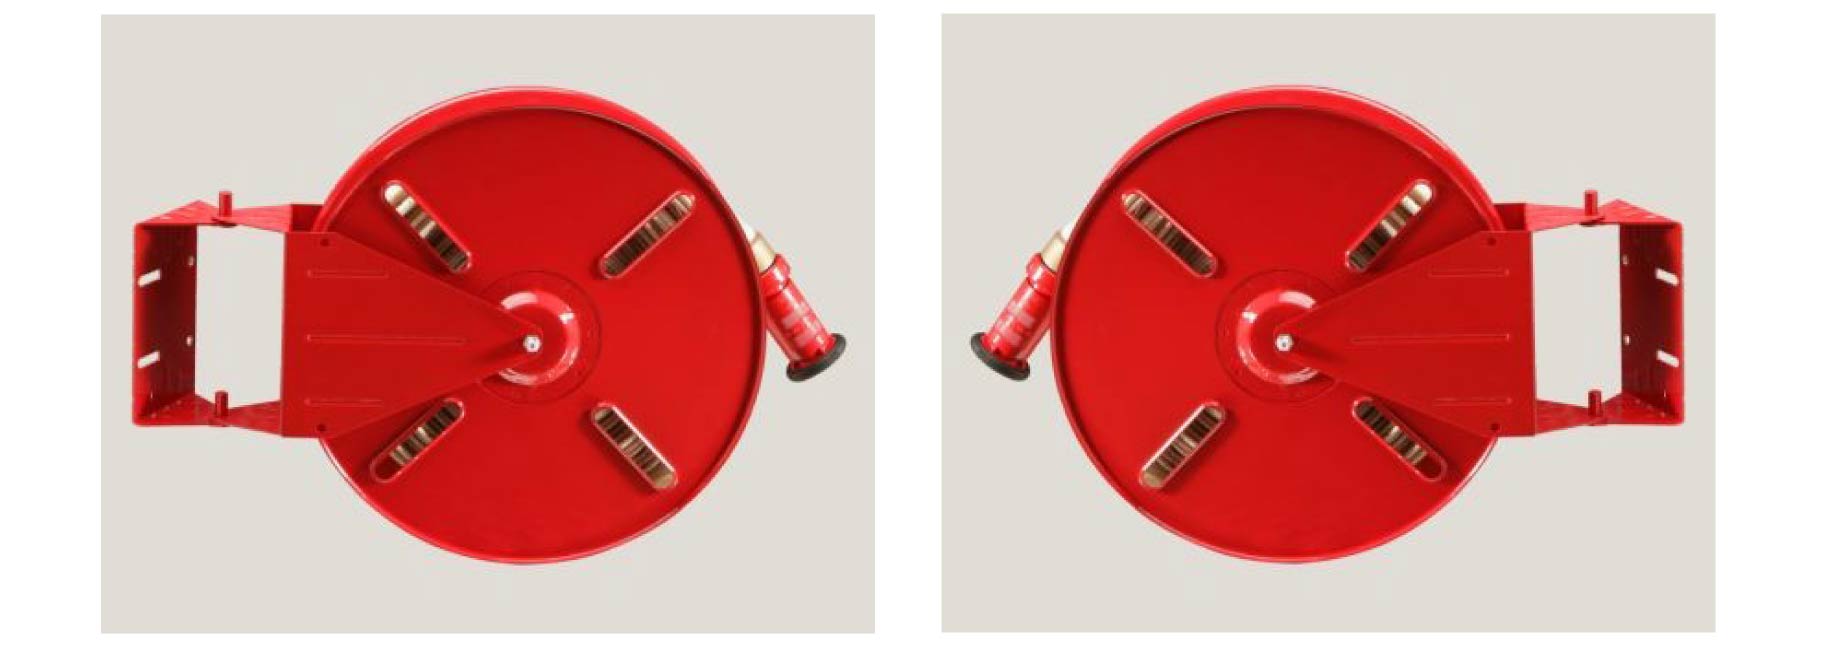 Fire Hose With Reel And Nozzle